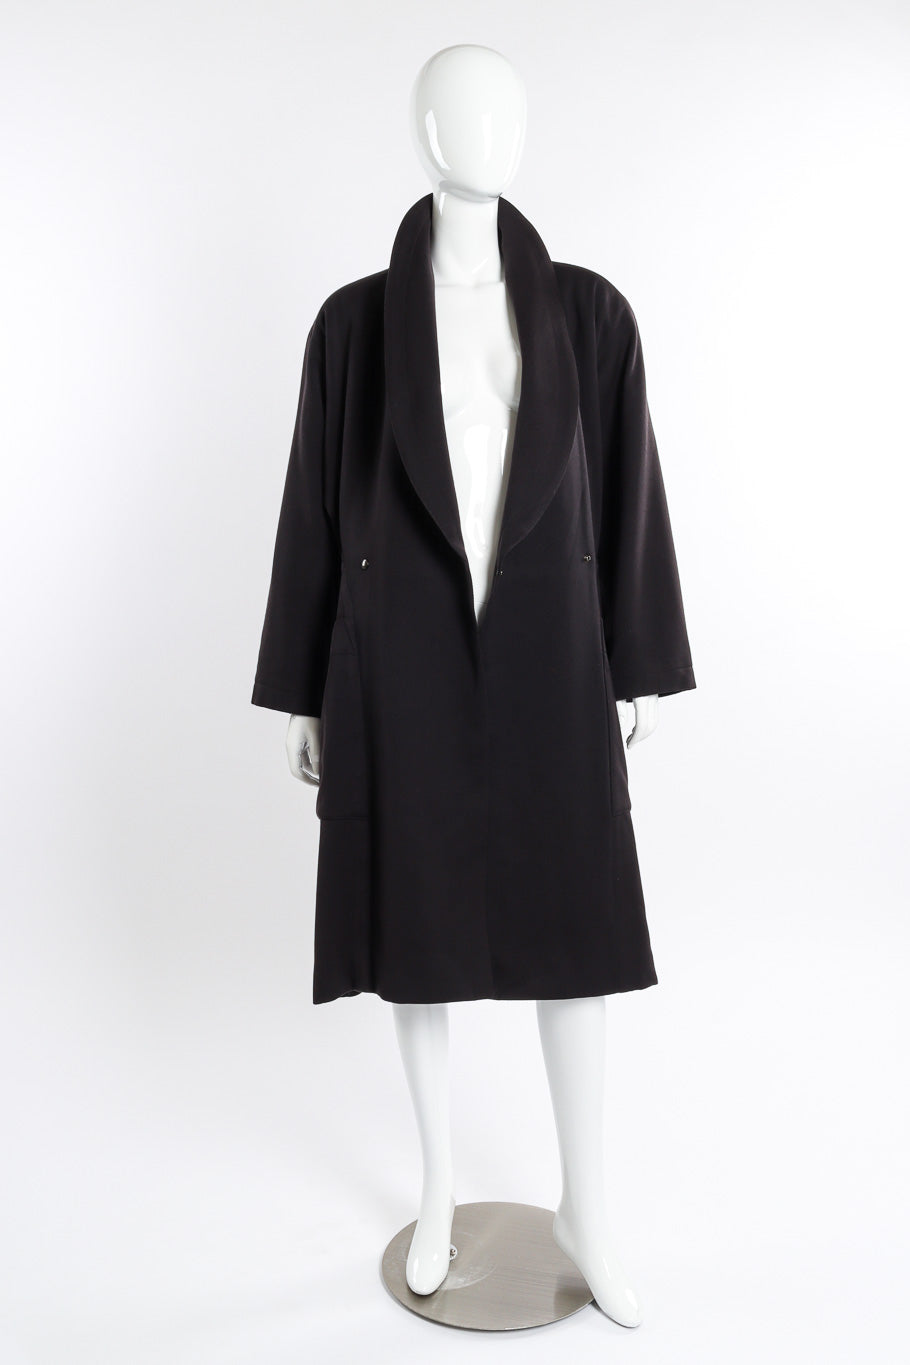 Vintage Alaia Oversized Double Breasted Wool Coat front view on mannequin unfastened @recessla